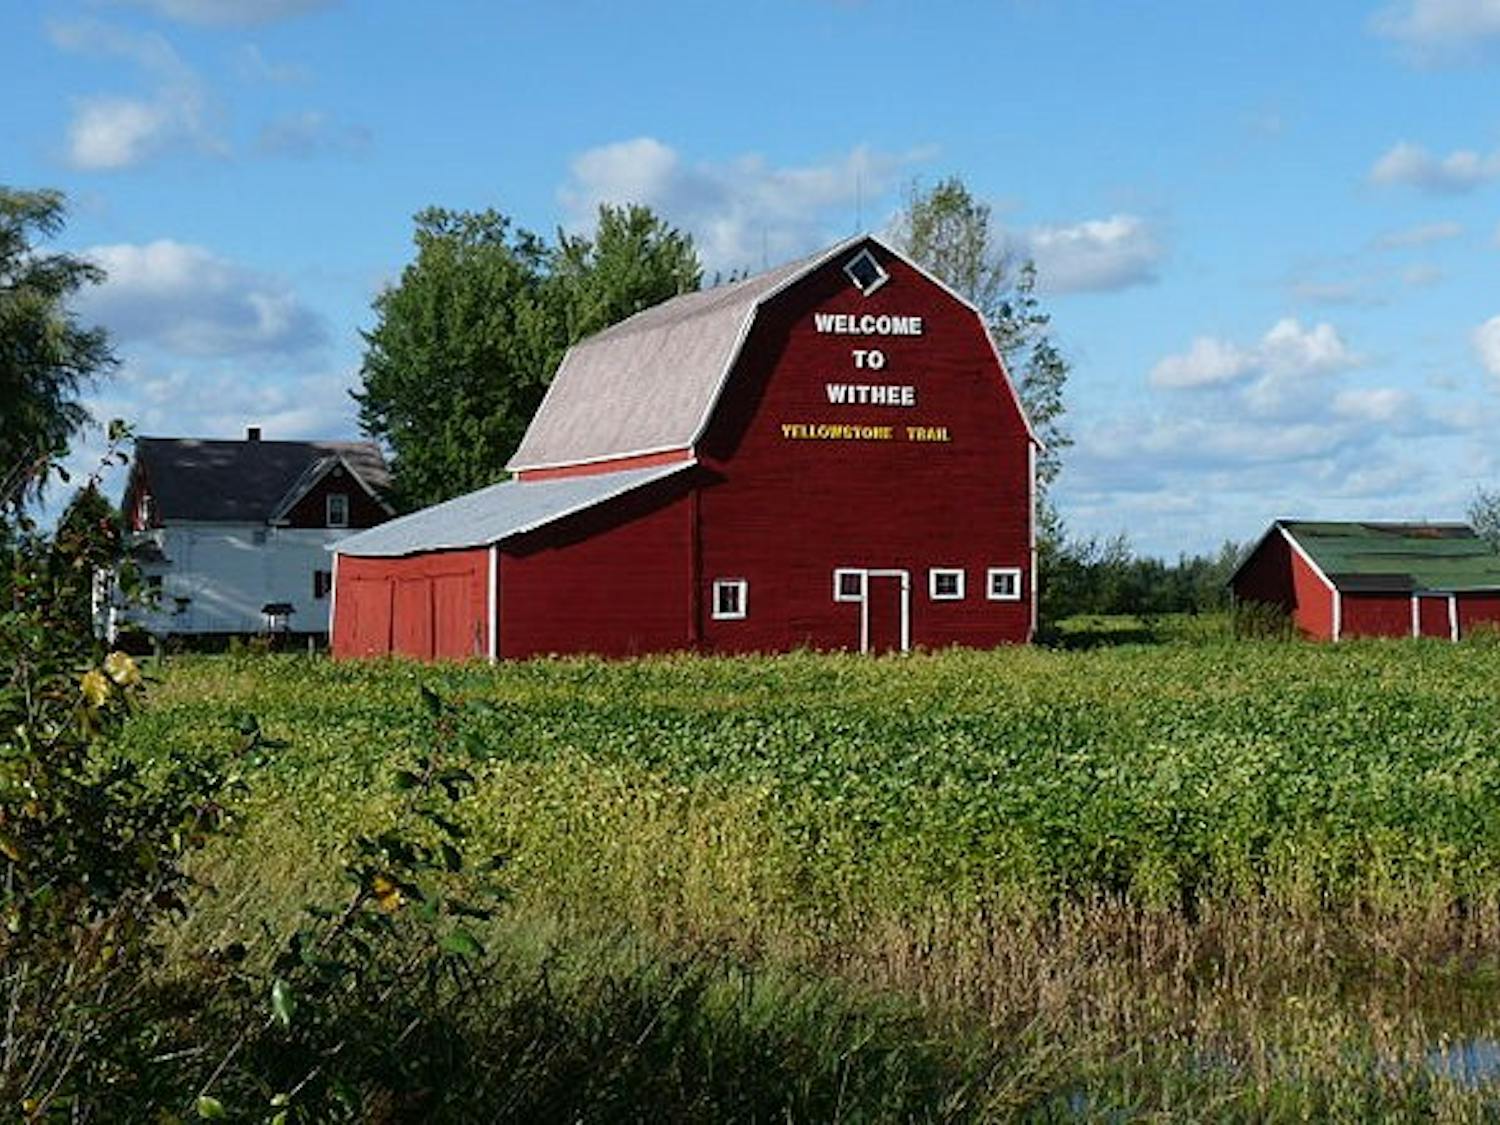 Rural Wisconsinites are led to believe that their urban counterparts benefit at their own expense.